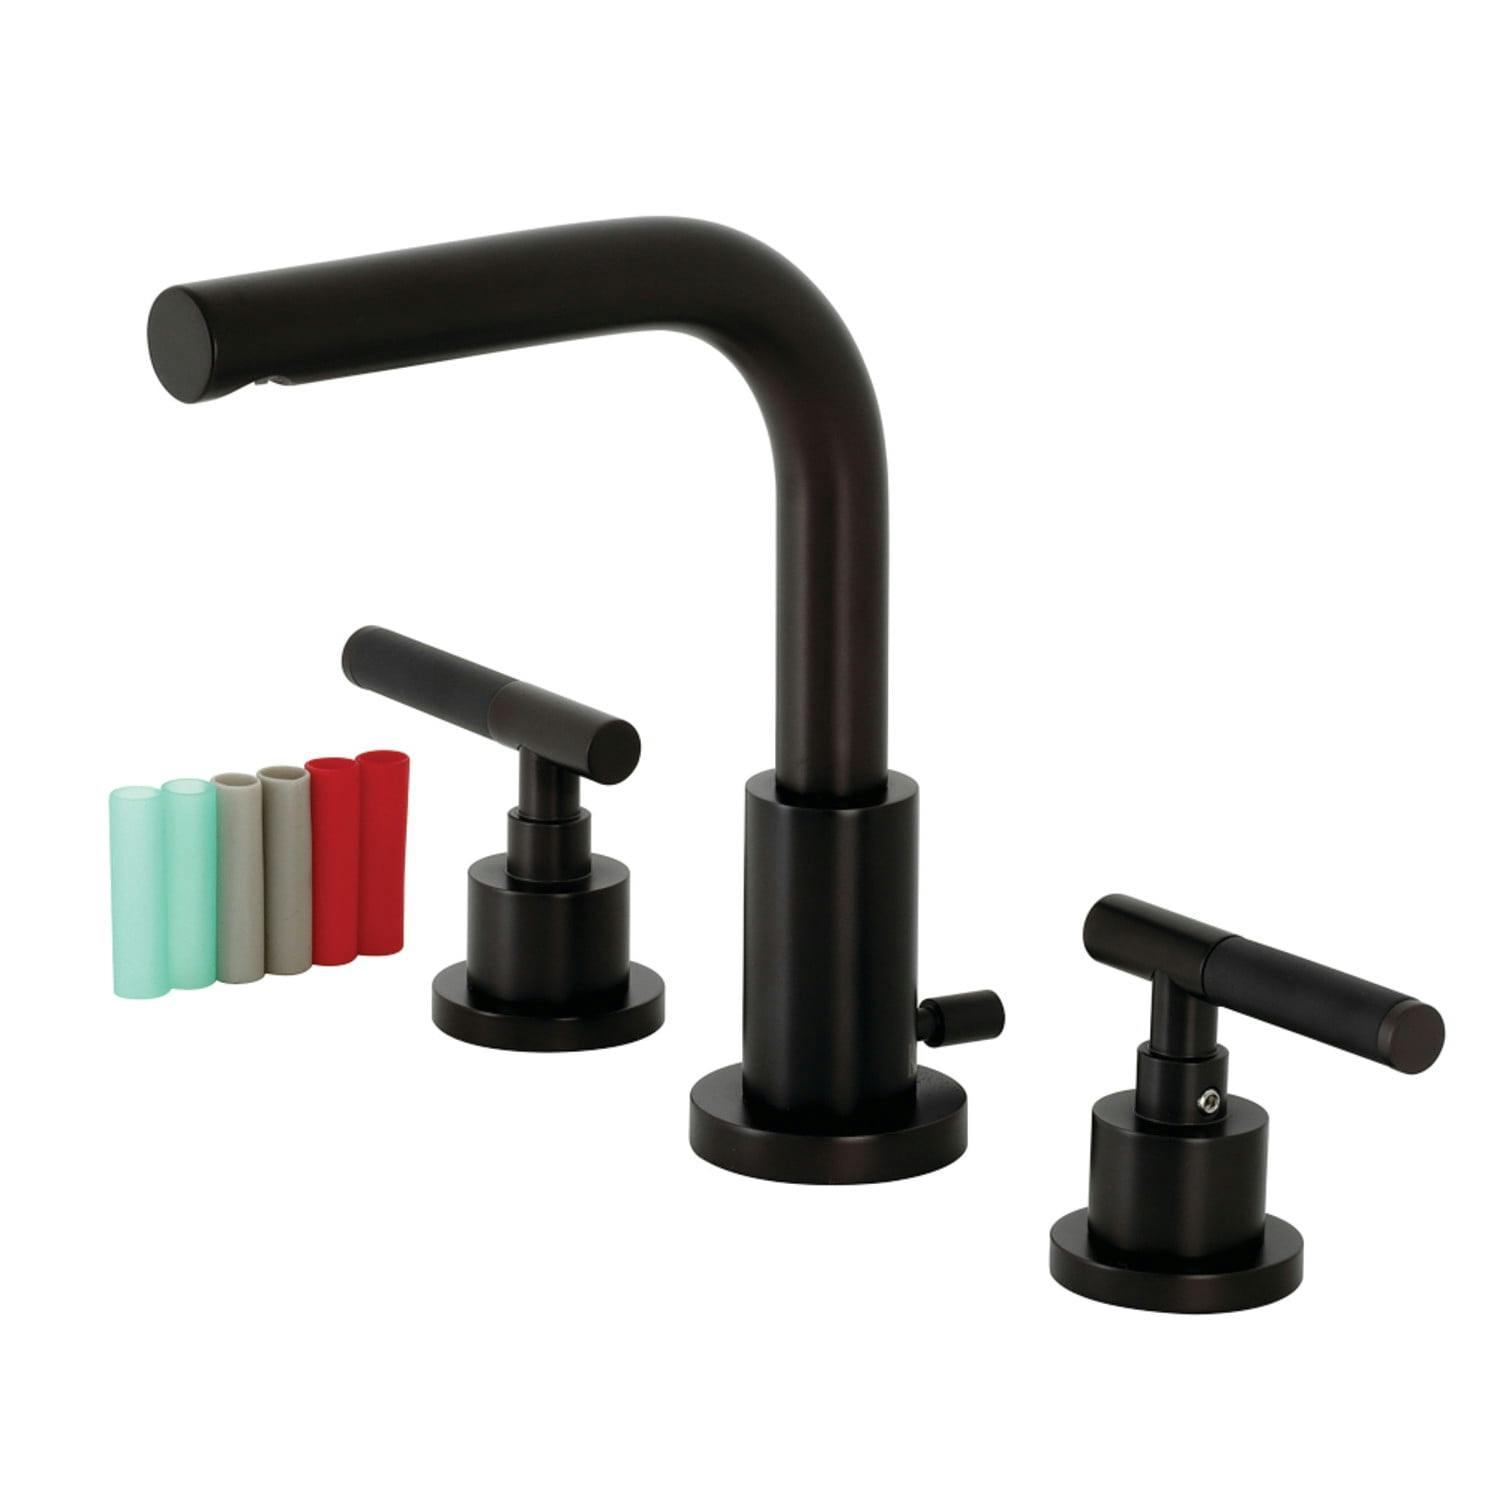 Kaiser 7.63" Oil Rubbed Bronze Widespread Bathroom Faucet with Pop-Up Drain